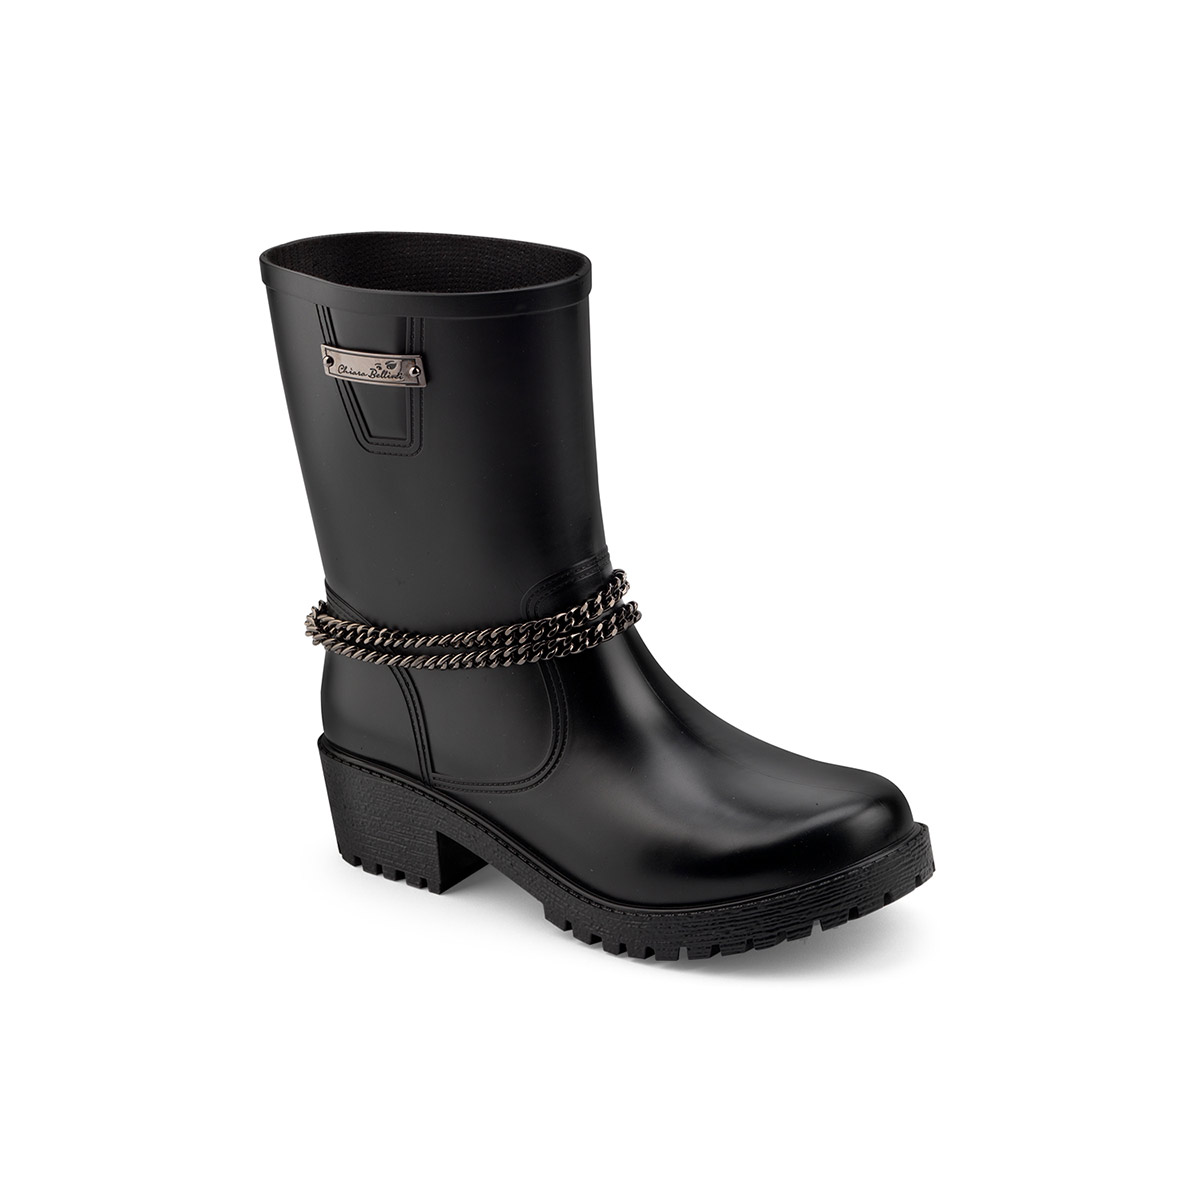 Pvc biker low boot with chain